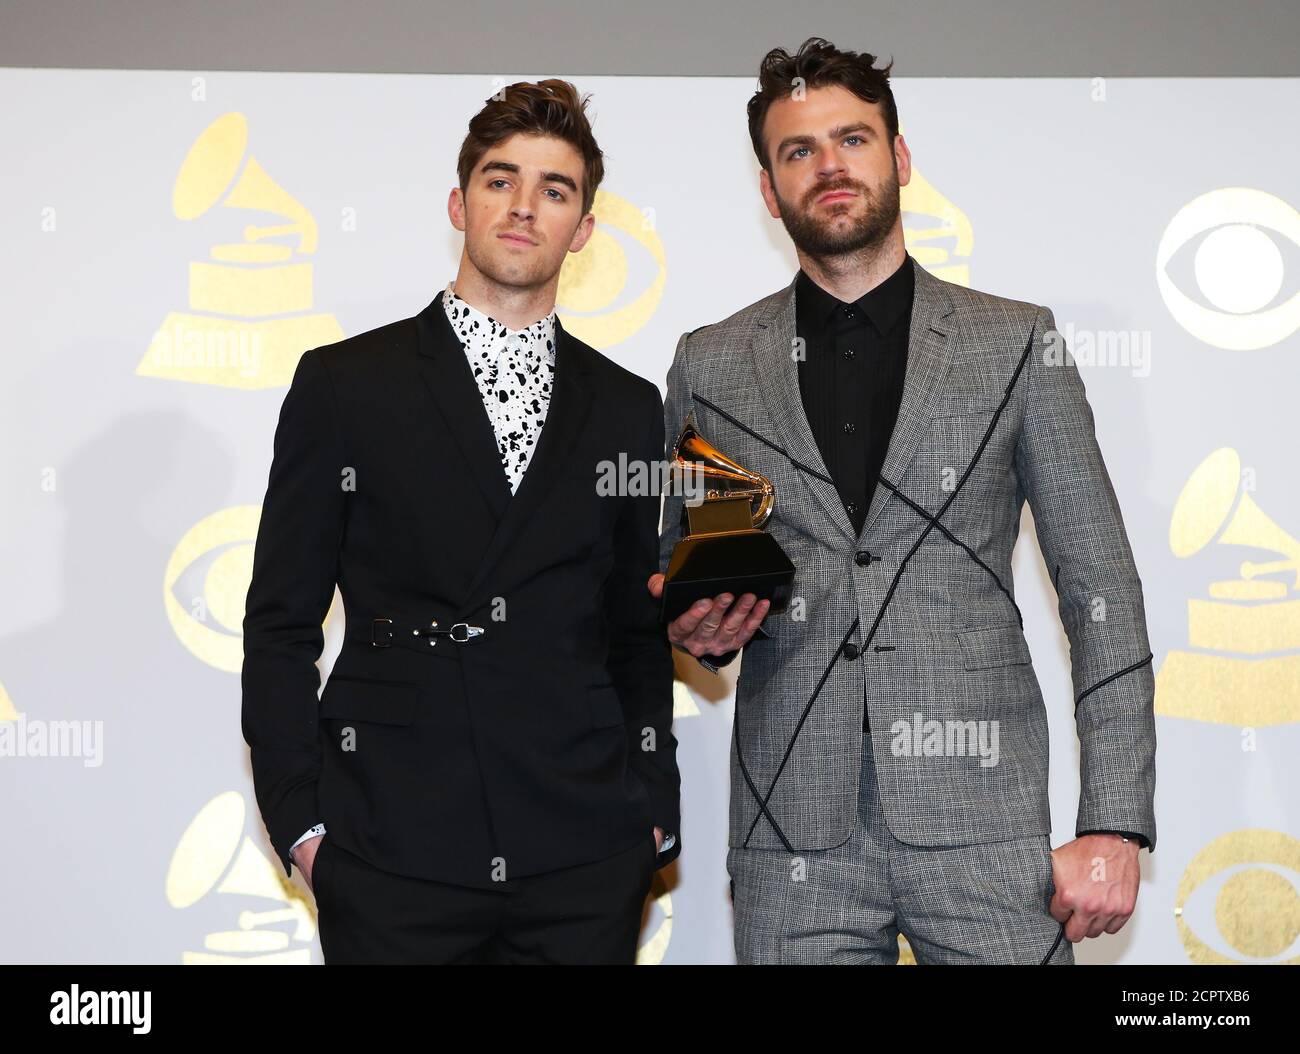 The Chainsmokers pose with the award they won for Best Dance Recording for  "Don't Let Me Down" at the 59th Annual Grammy Awards in Los Angeles,  California, U.S. , February 12, 2017.